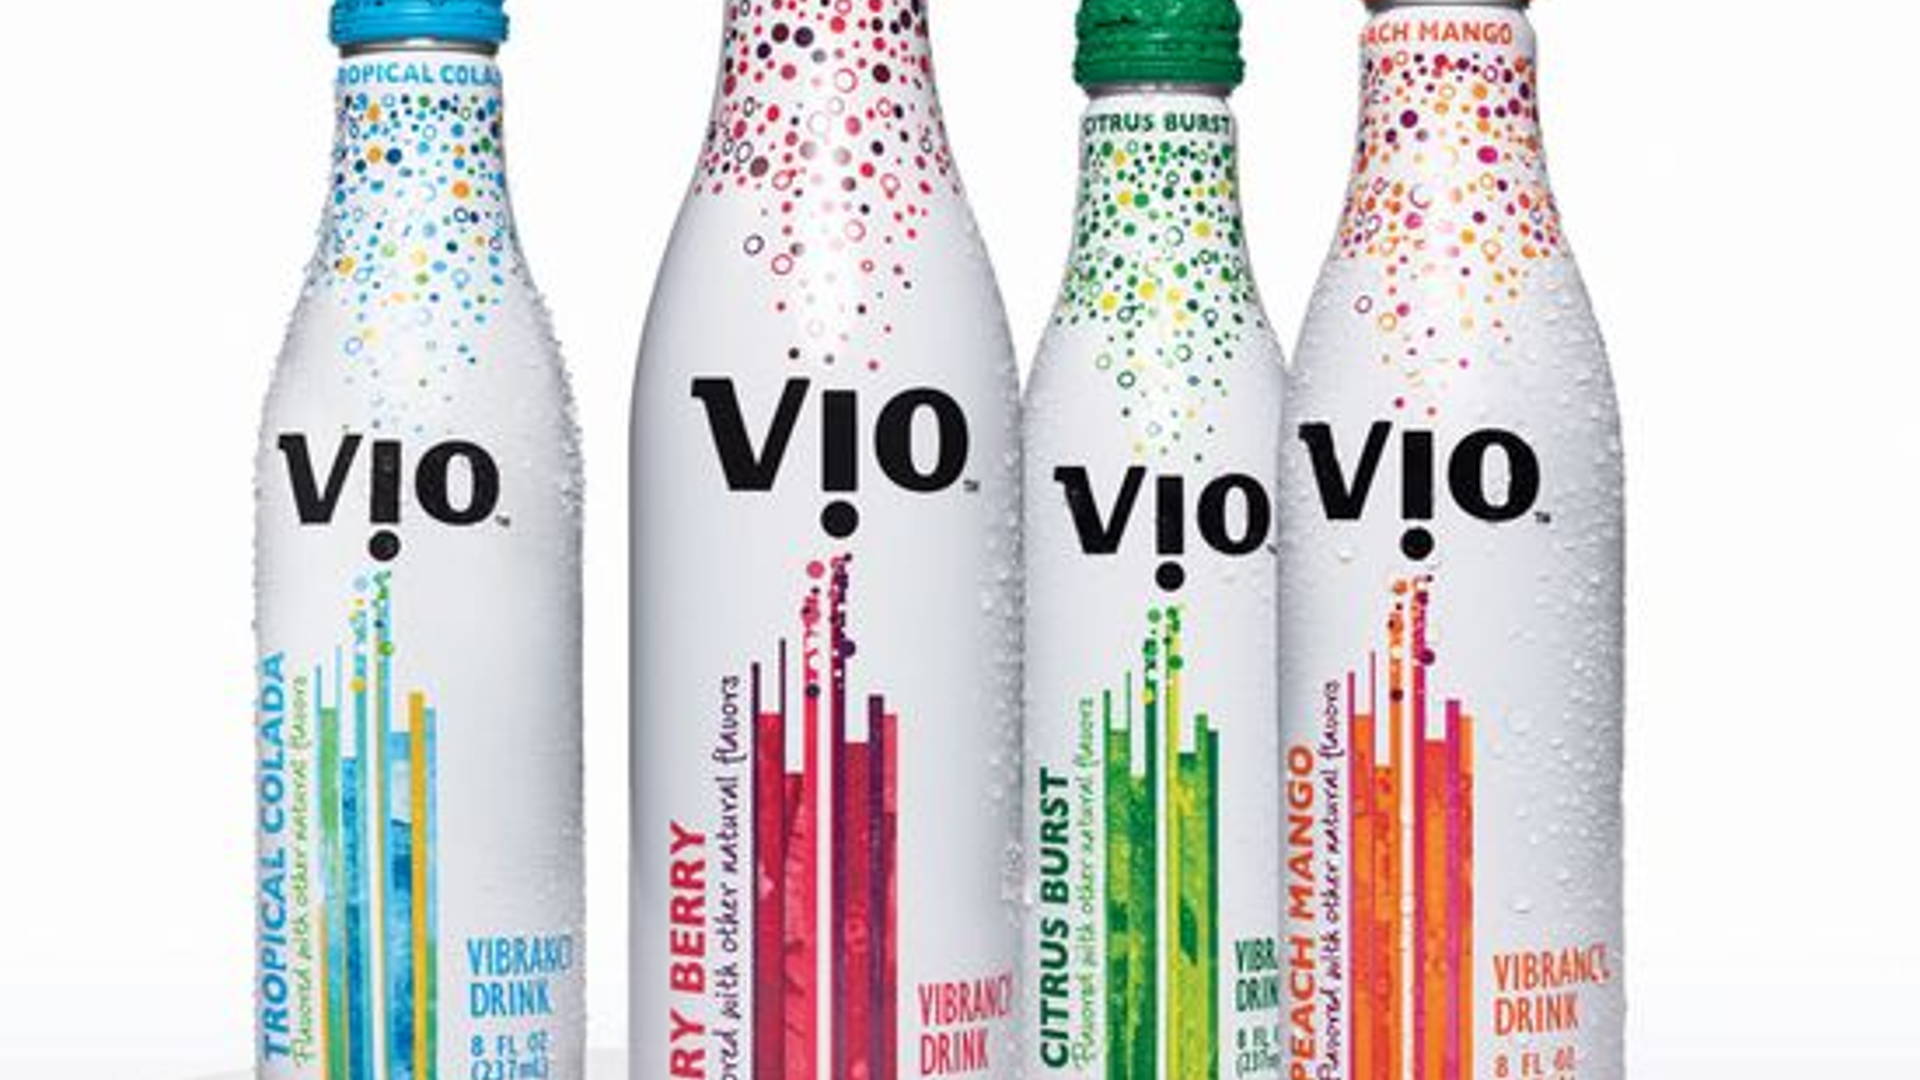 Featured image for Vio Vibrance Drink by Coca-Cola